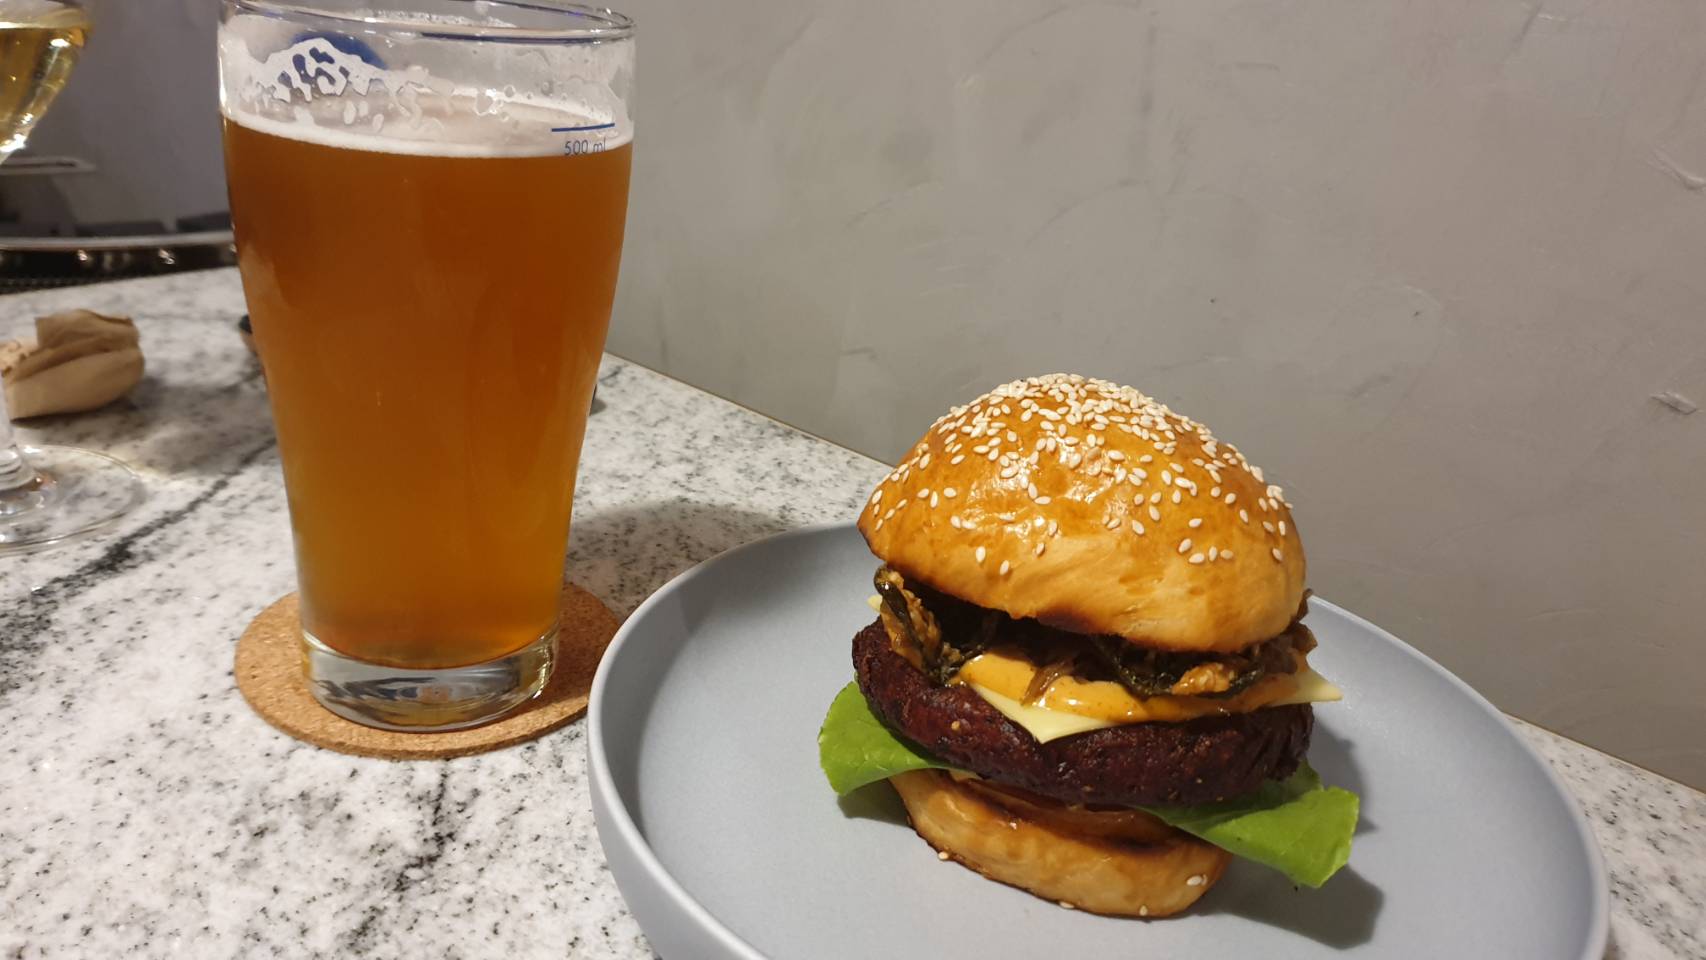 Friday evening’s Veggie Beast and a pint of beer. Photo: Coconuts